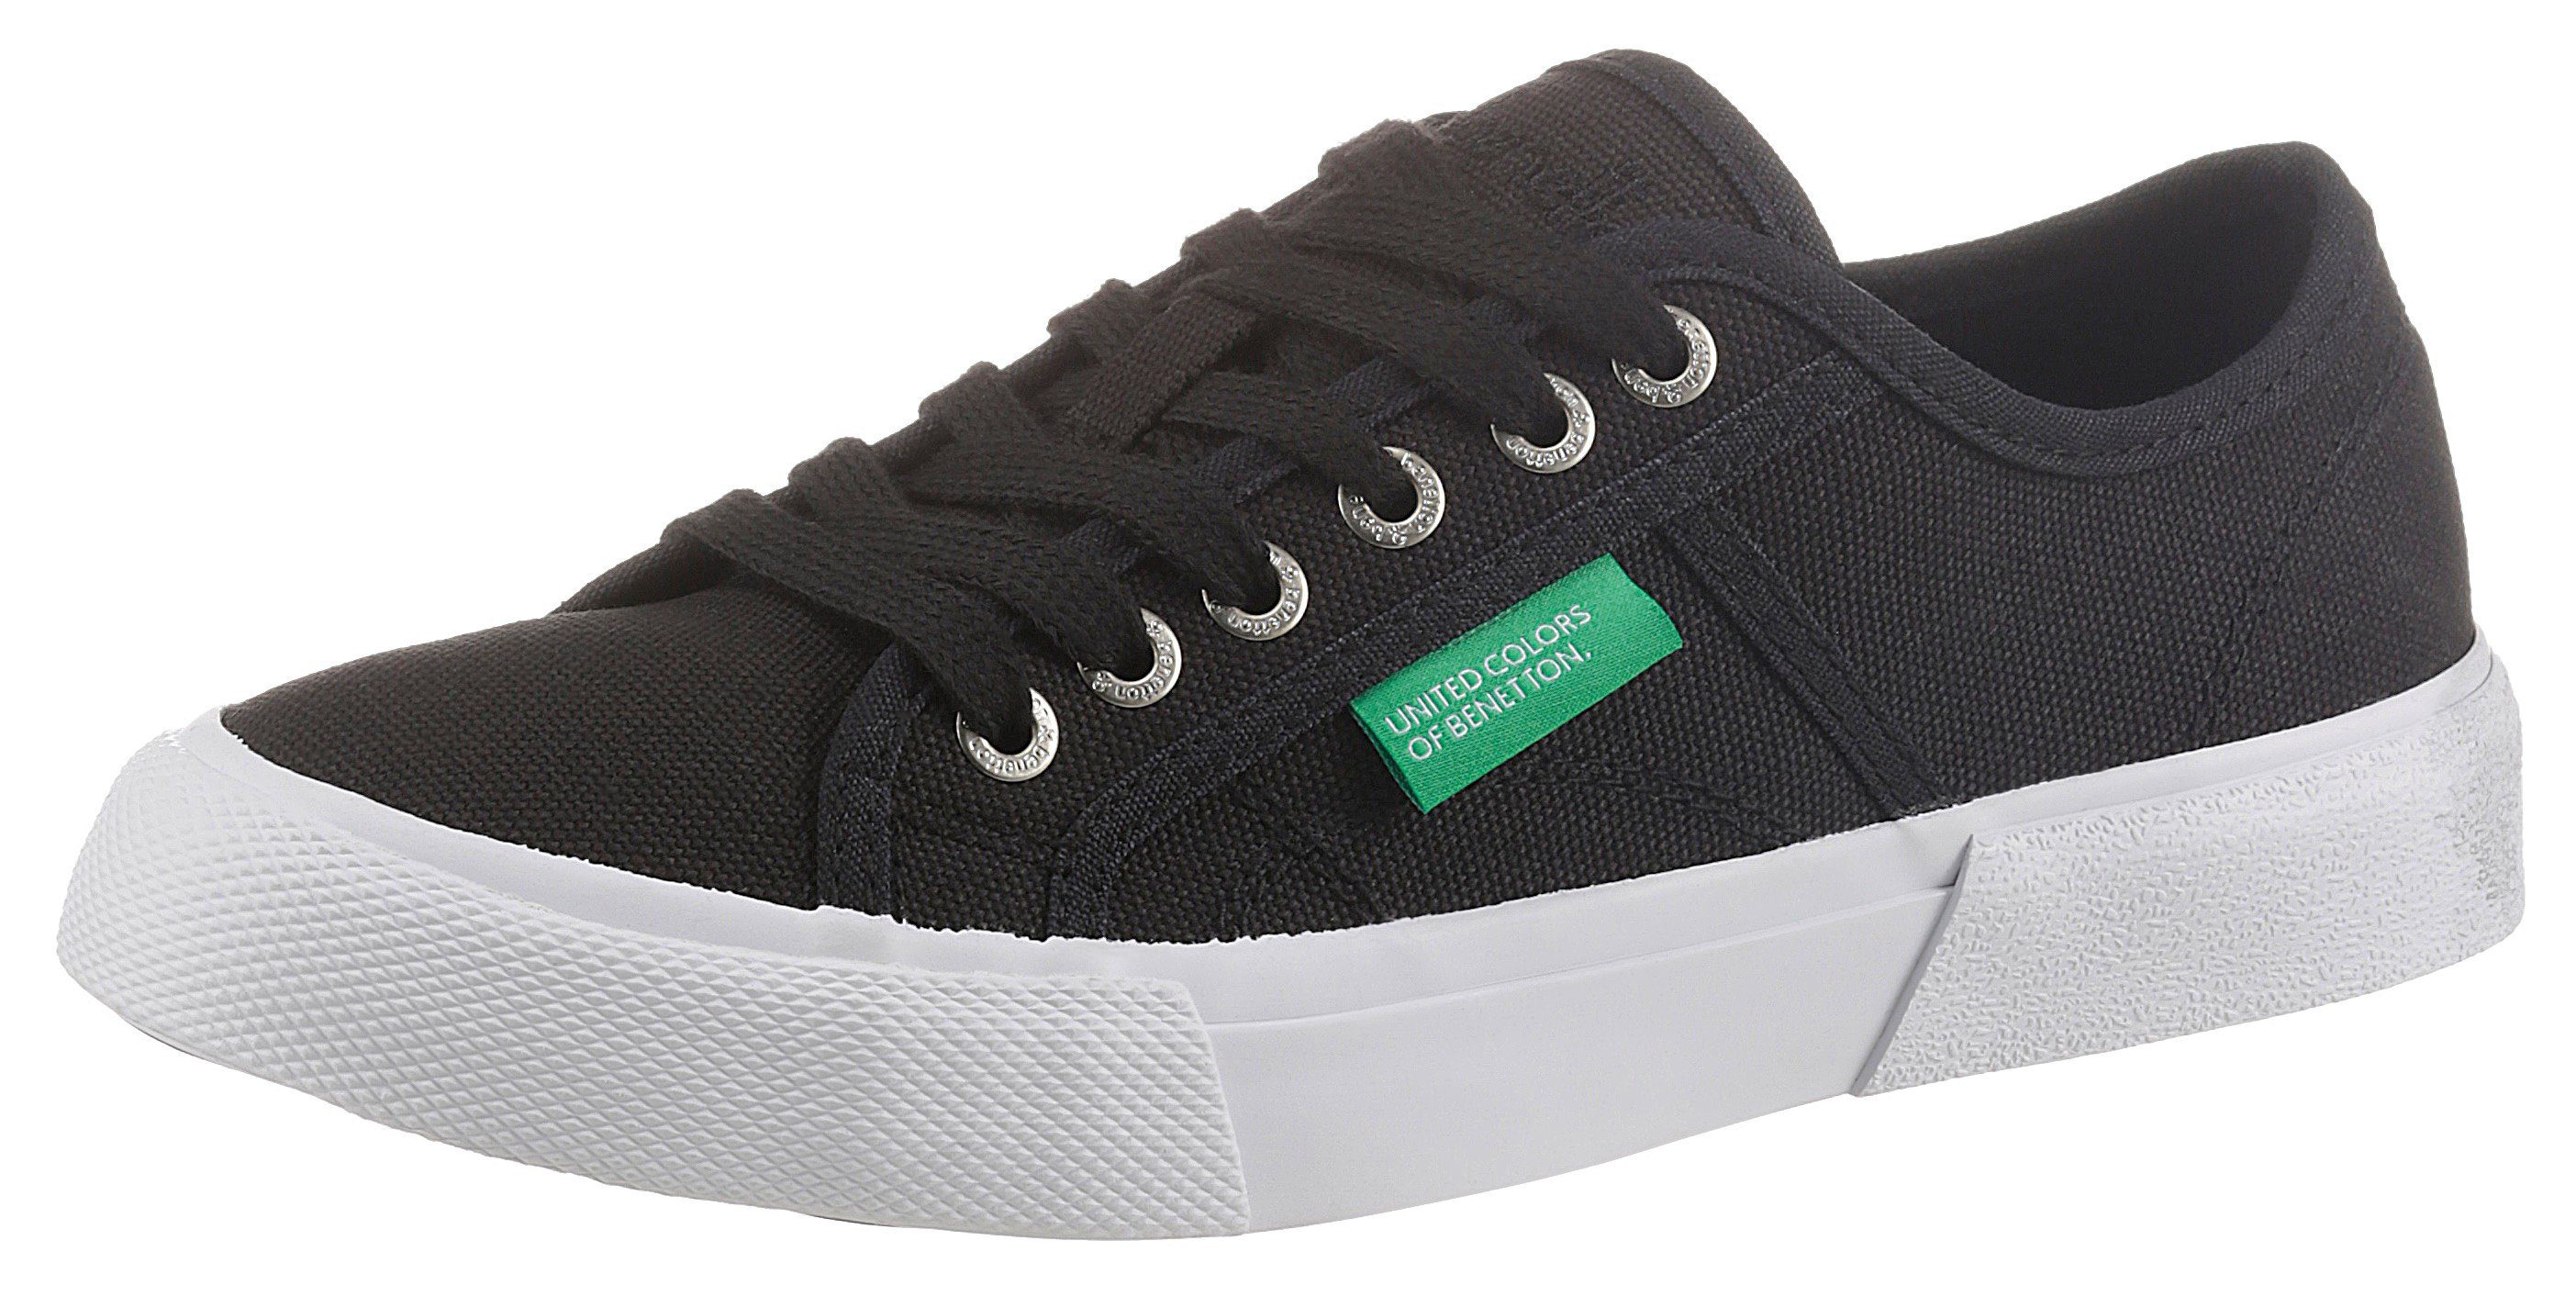 United Colors of Benetton »Tyke« Sneaker mit Label | OTTO